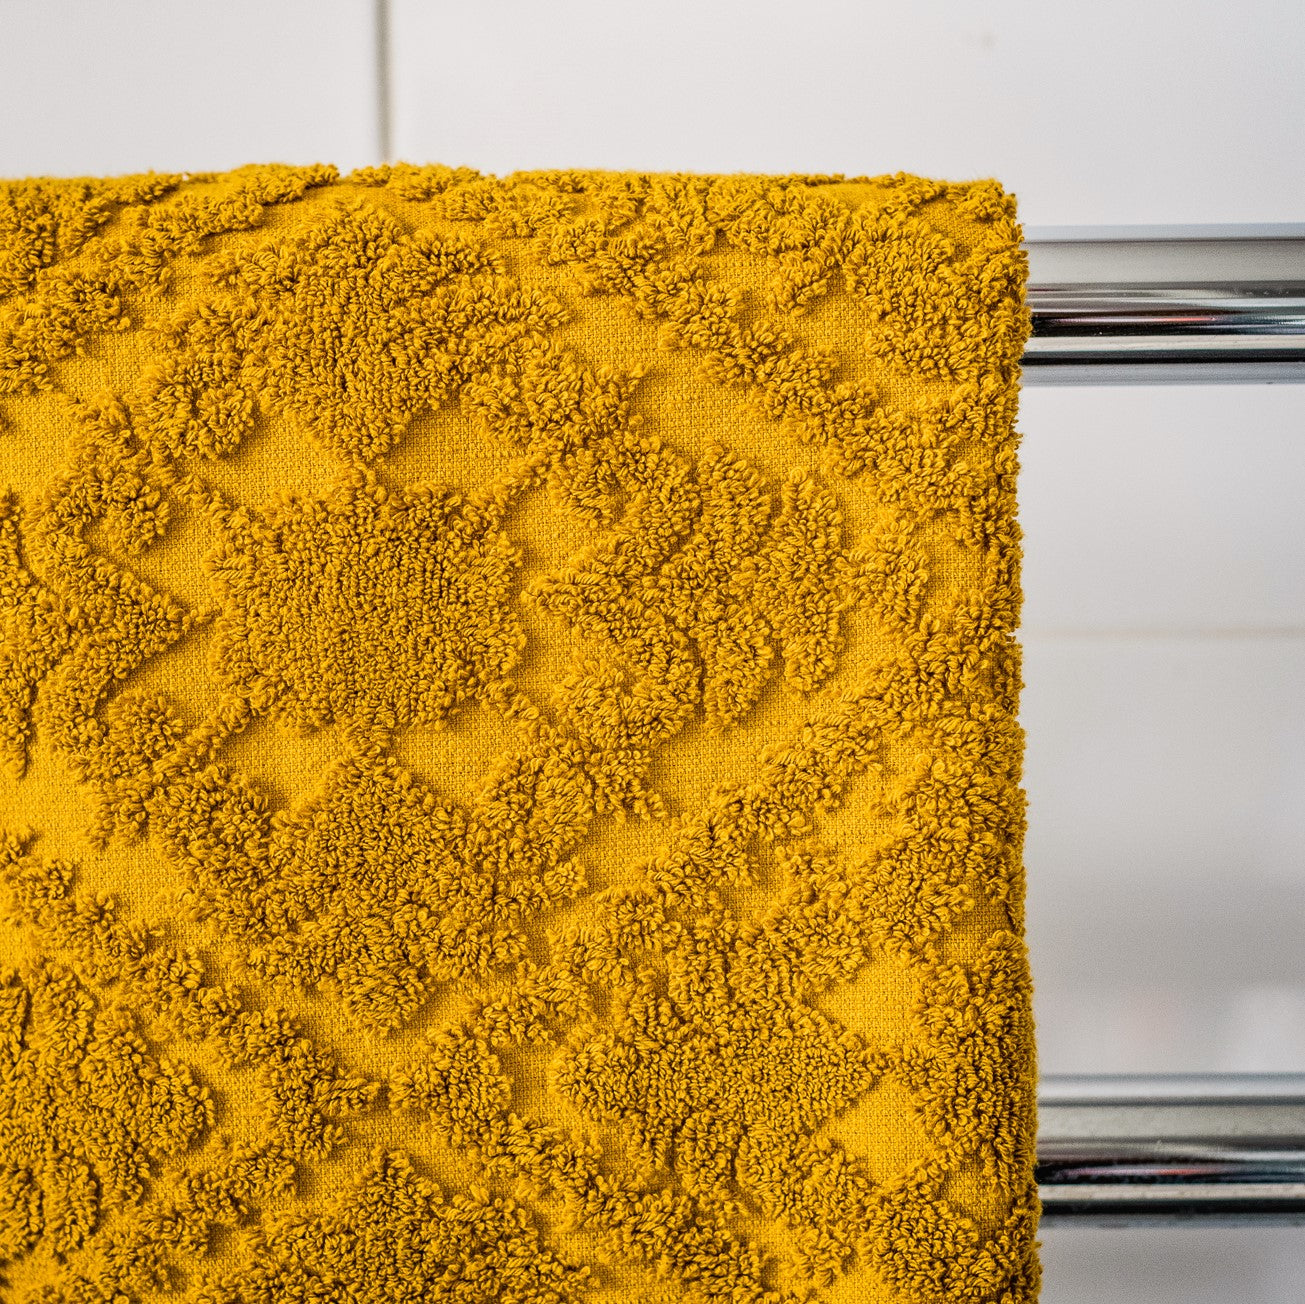 Mustard Bath Towel - Textured Sculpted Floral Patterned Towels